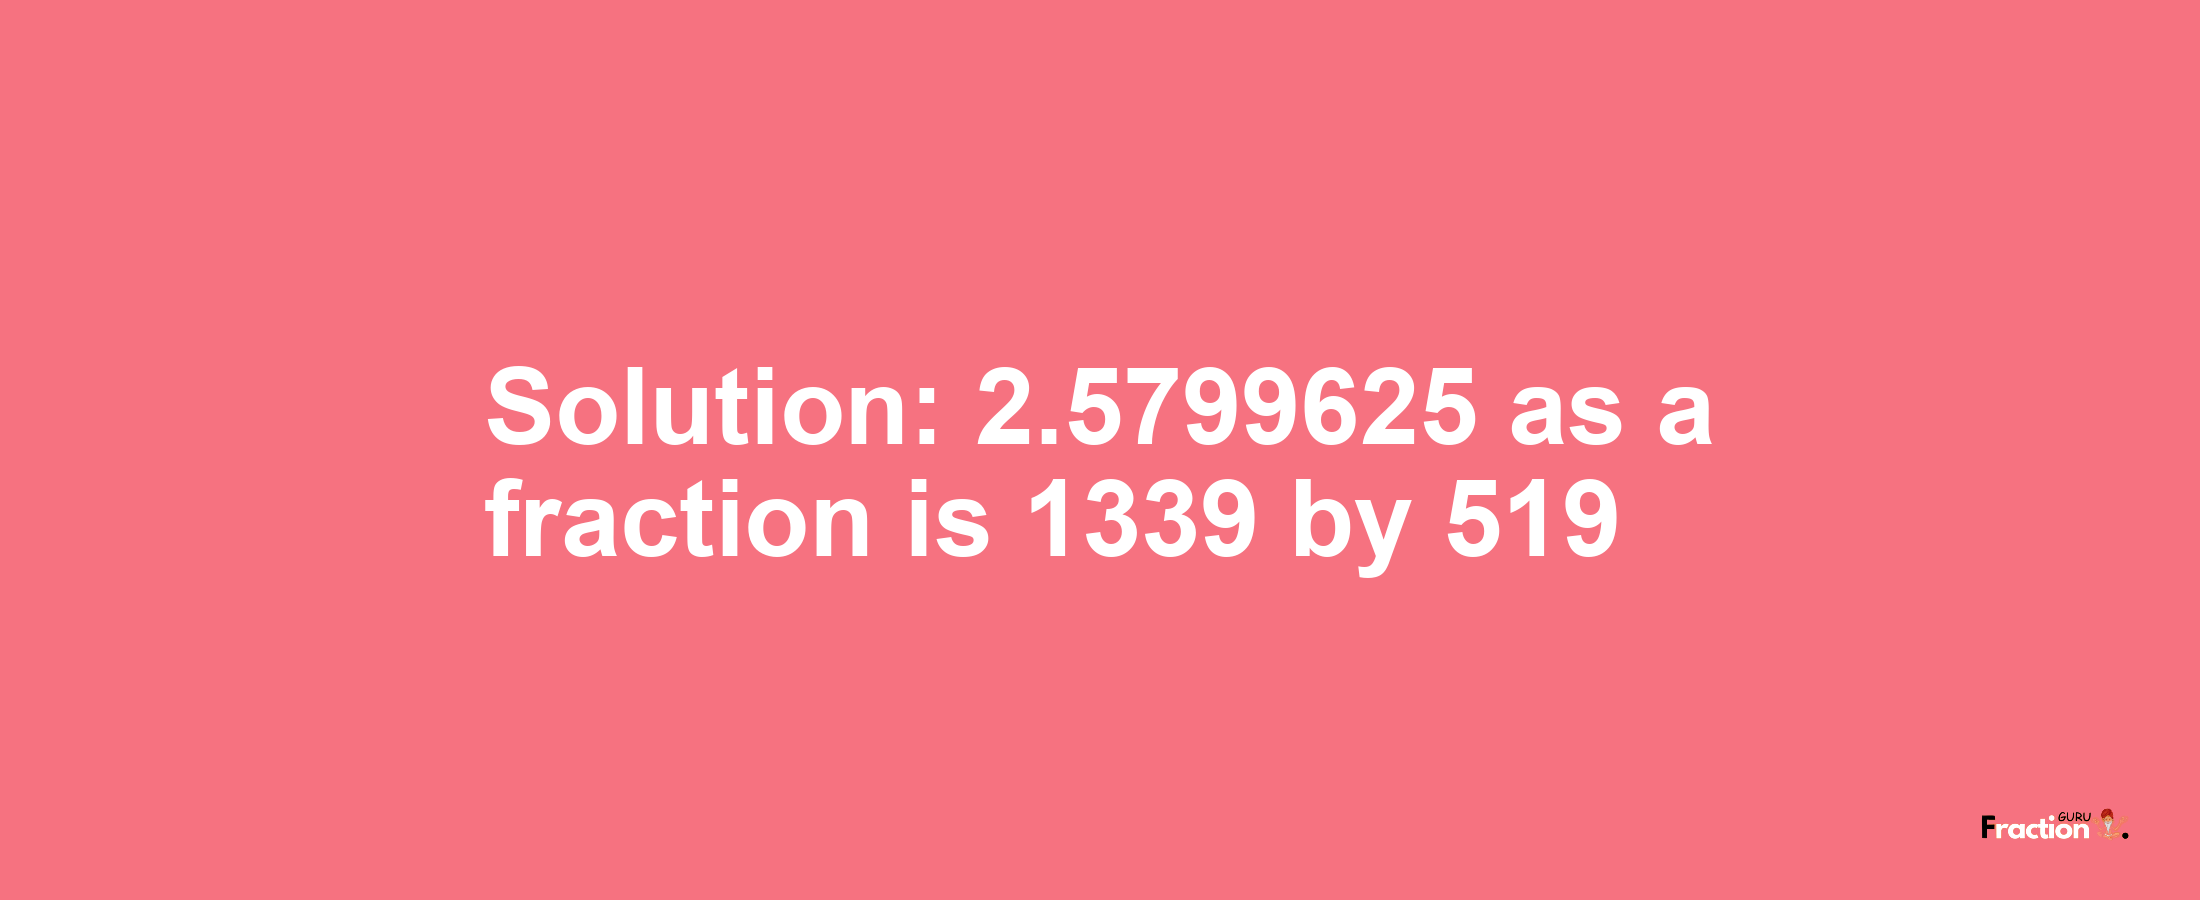 Solution:2.5799625 as a fraction is 1339/519